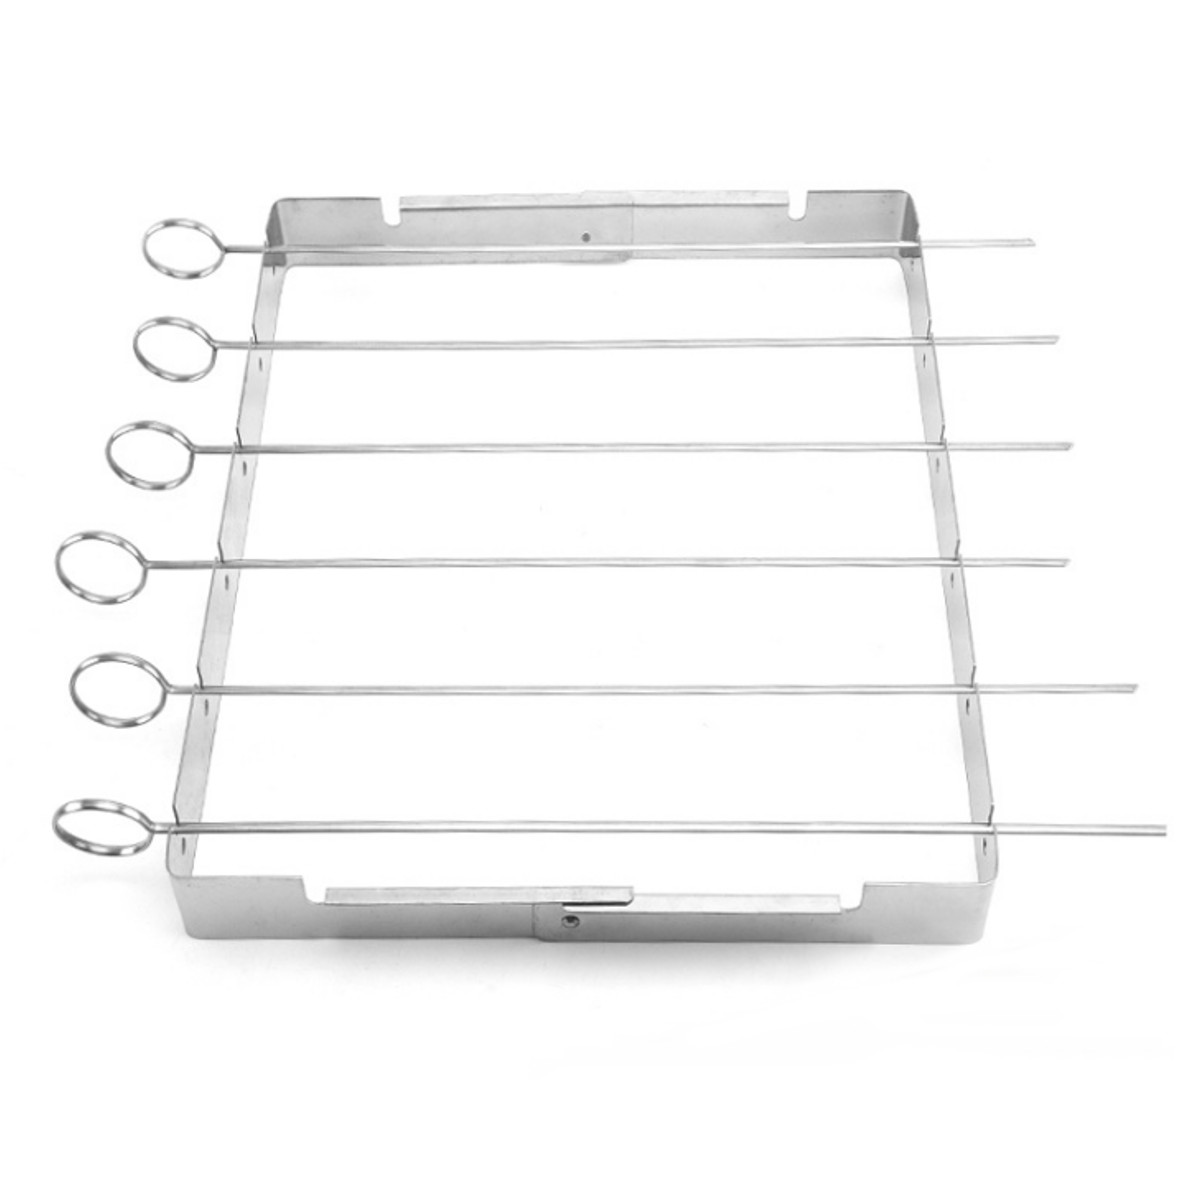 Portable-Barbecue-BBQ-Rack-Stainless-Steel-Skewer-Meat-Foods-Grill-Camping-Tool-1753748-6